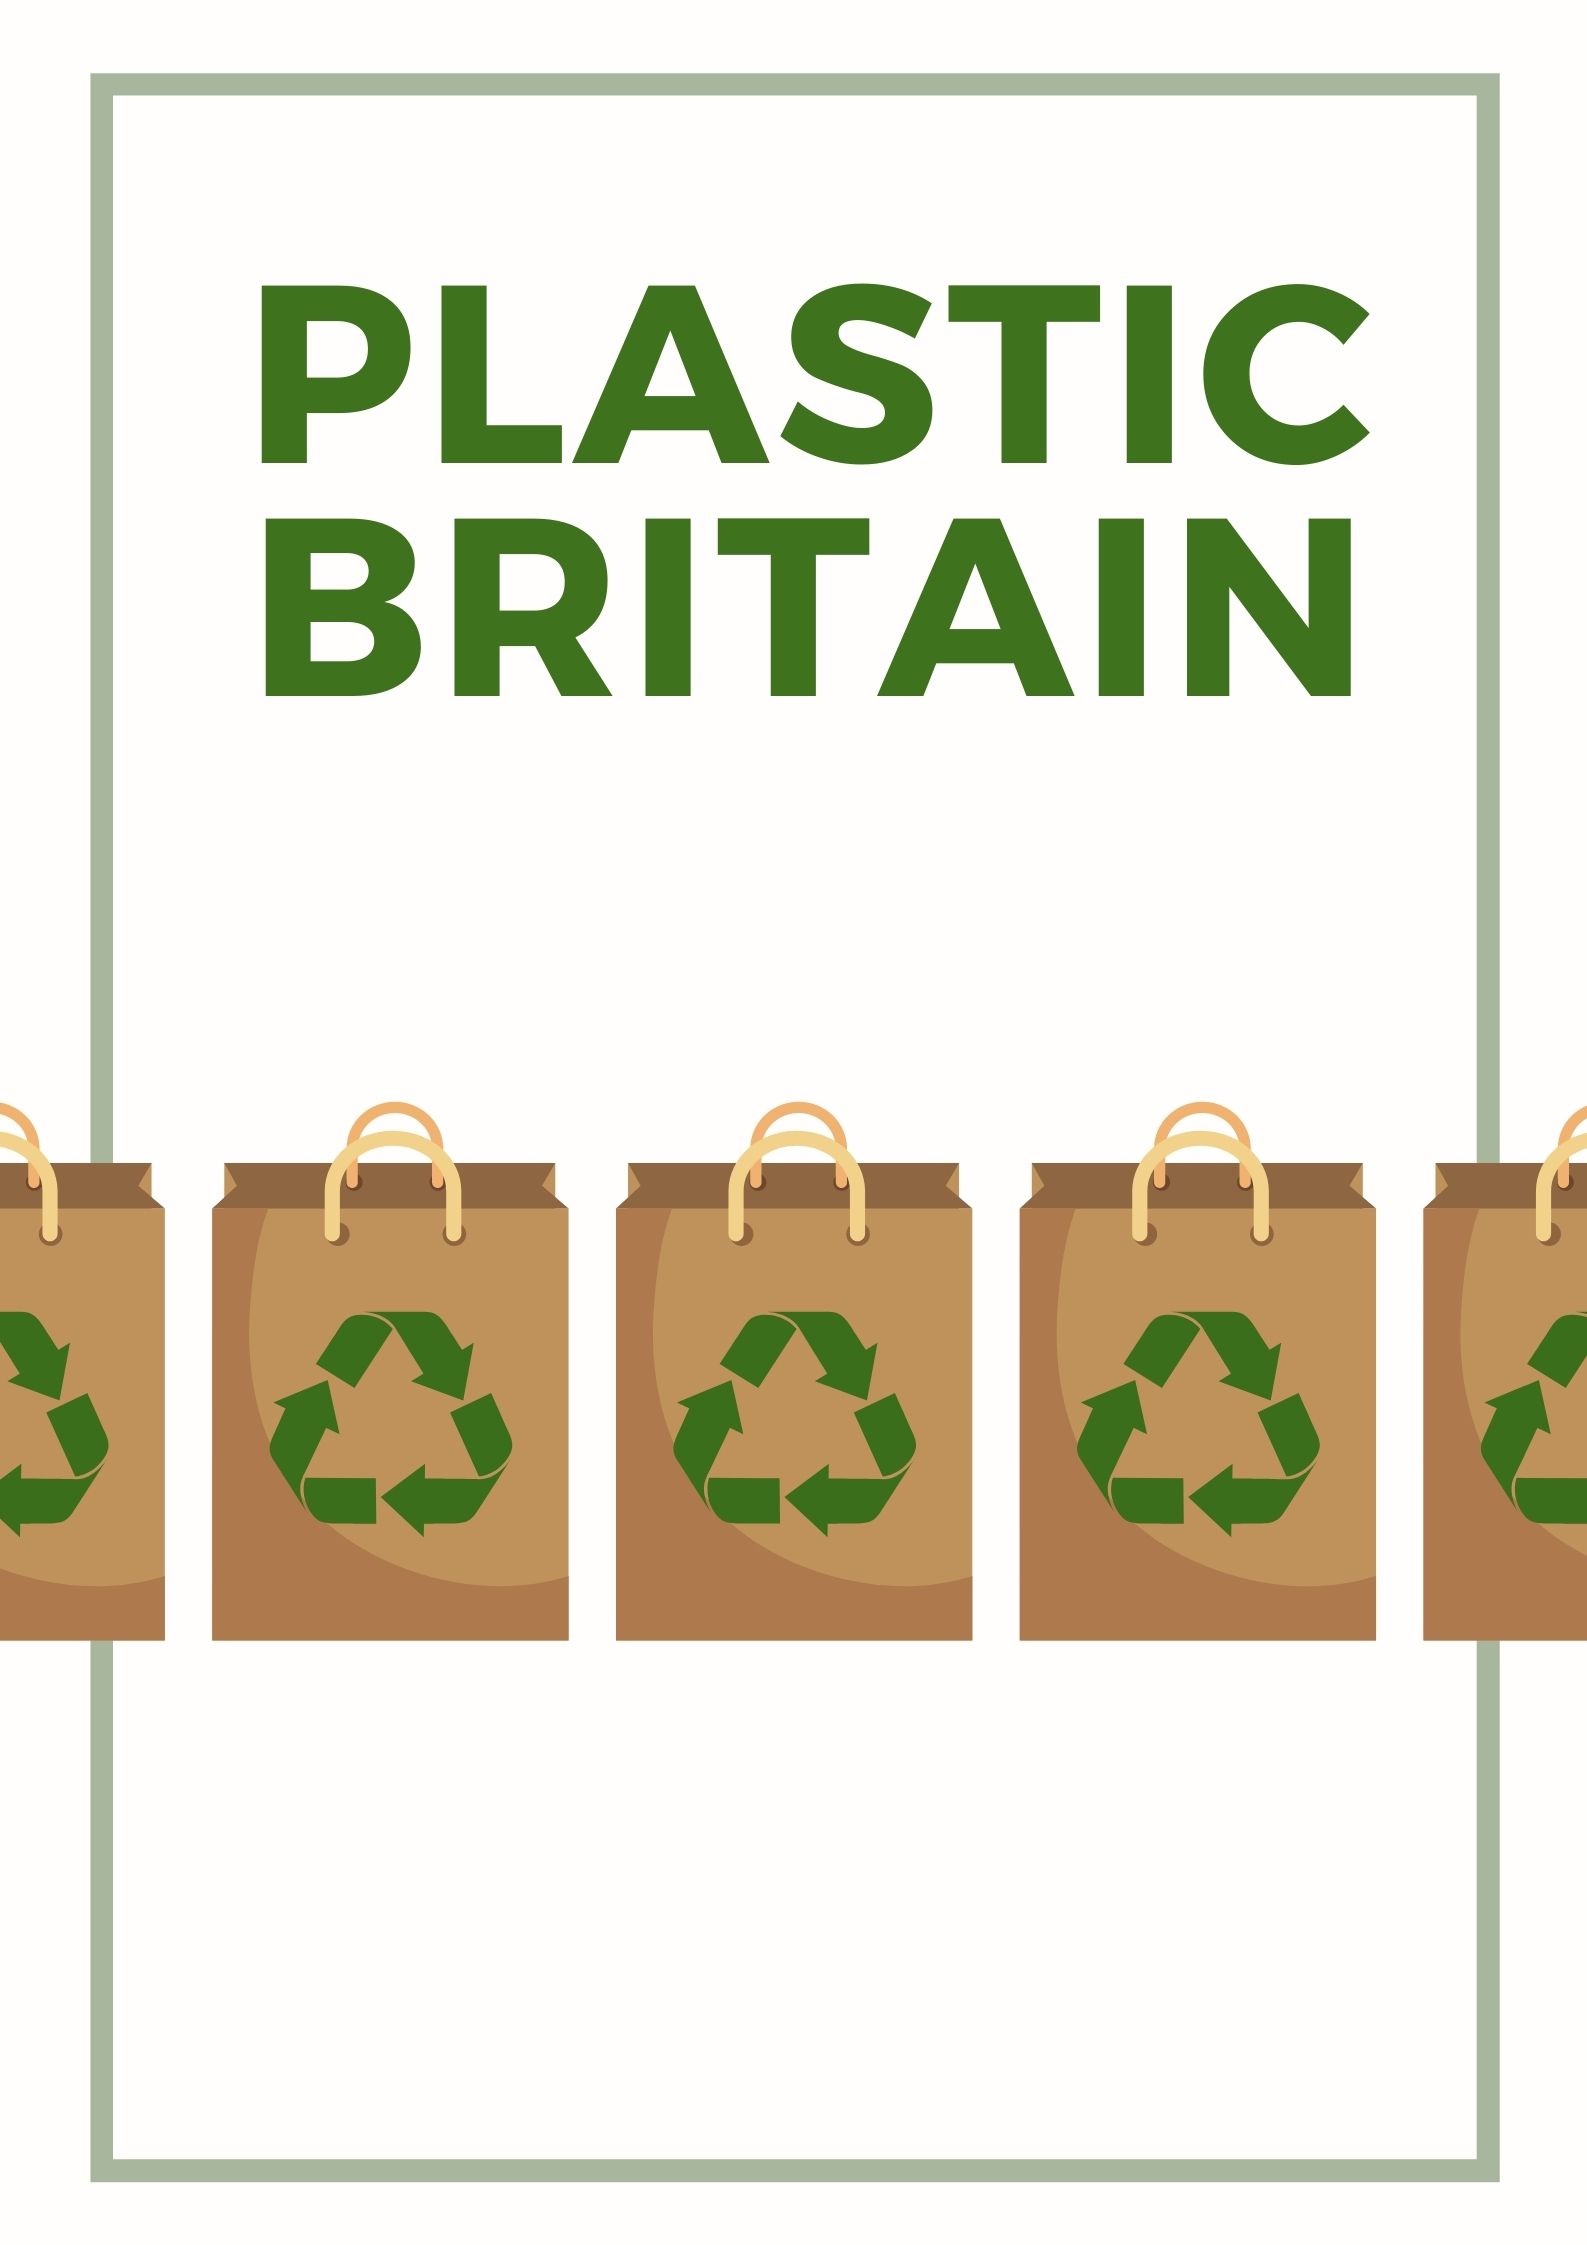 Plastic Britain: On Our Watch (2020)